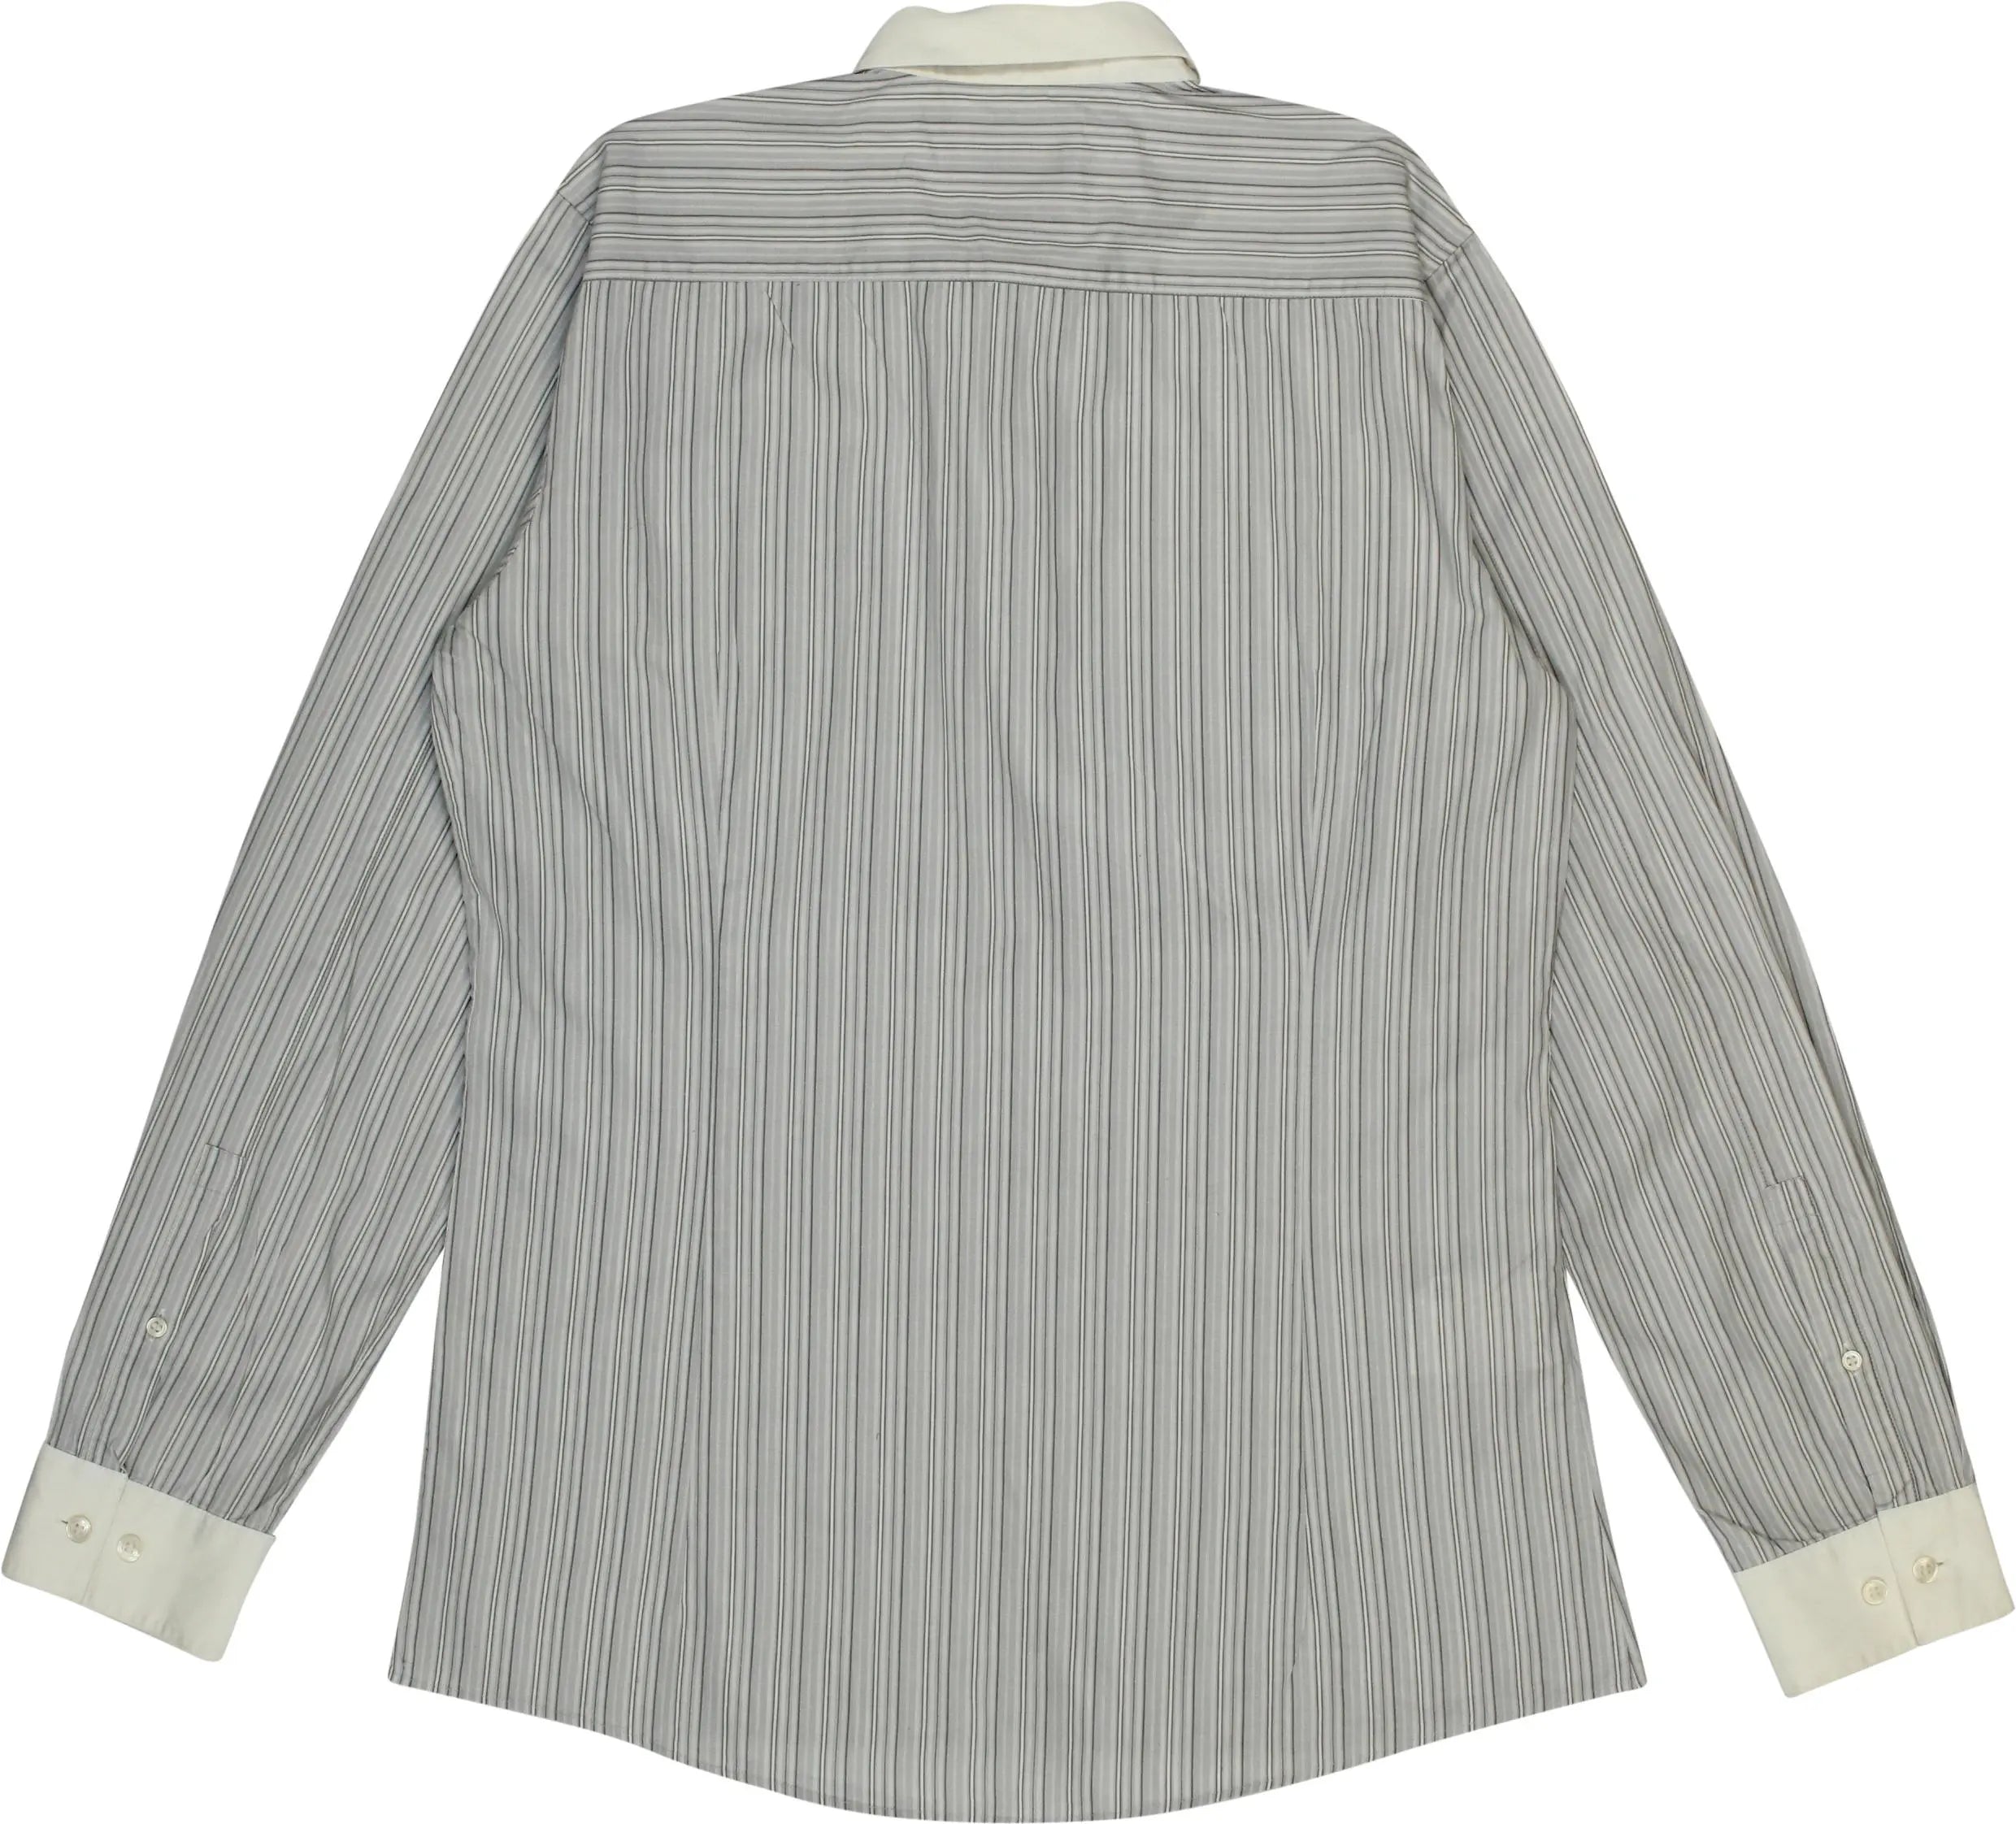 Hugo Boss - Striped Shirt by Hugo Boss- ThriftTale.com - Vintage and second handclothing